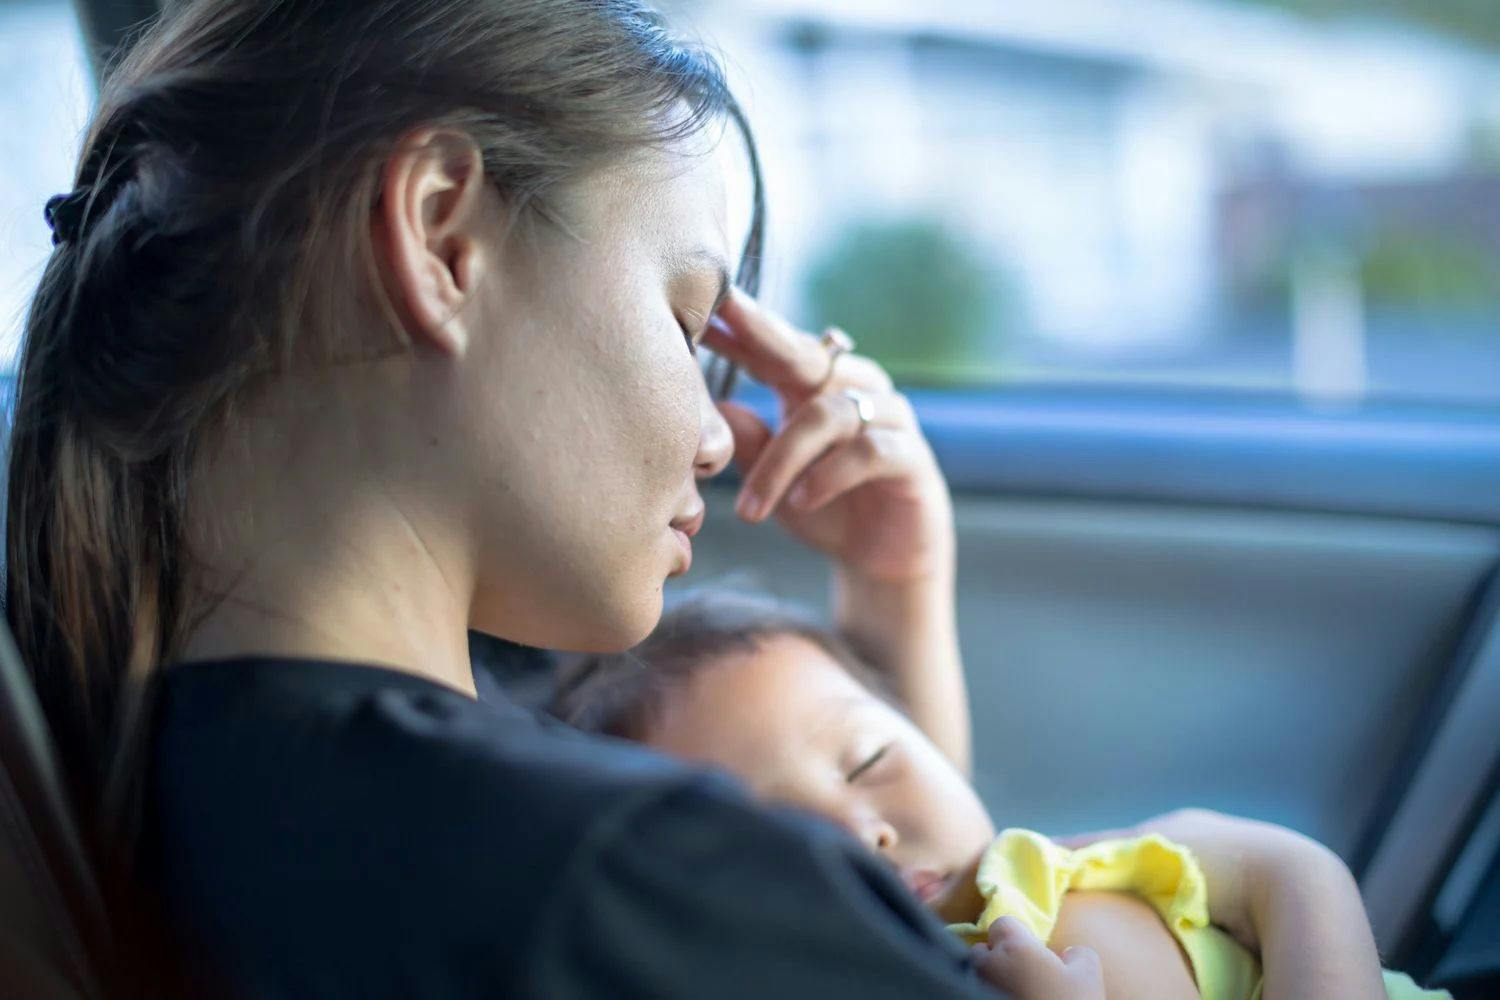 Postpartum psychosis is experienced by 1 to 2 women every 1000 deliveries.